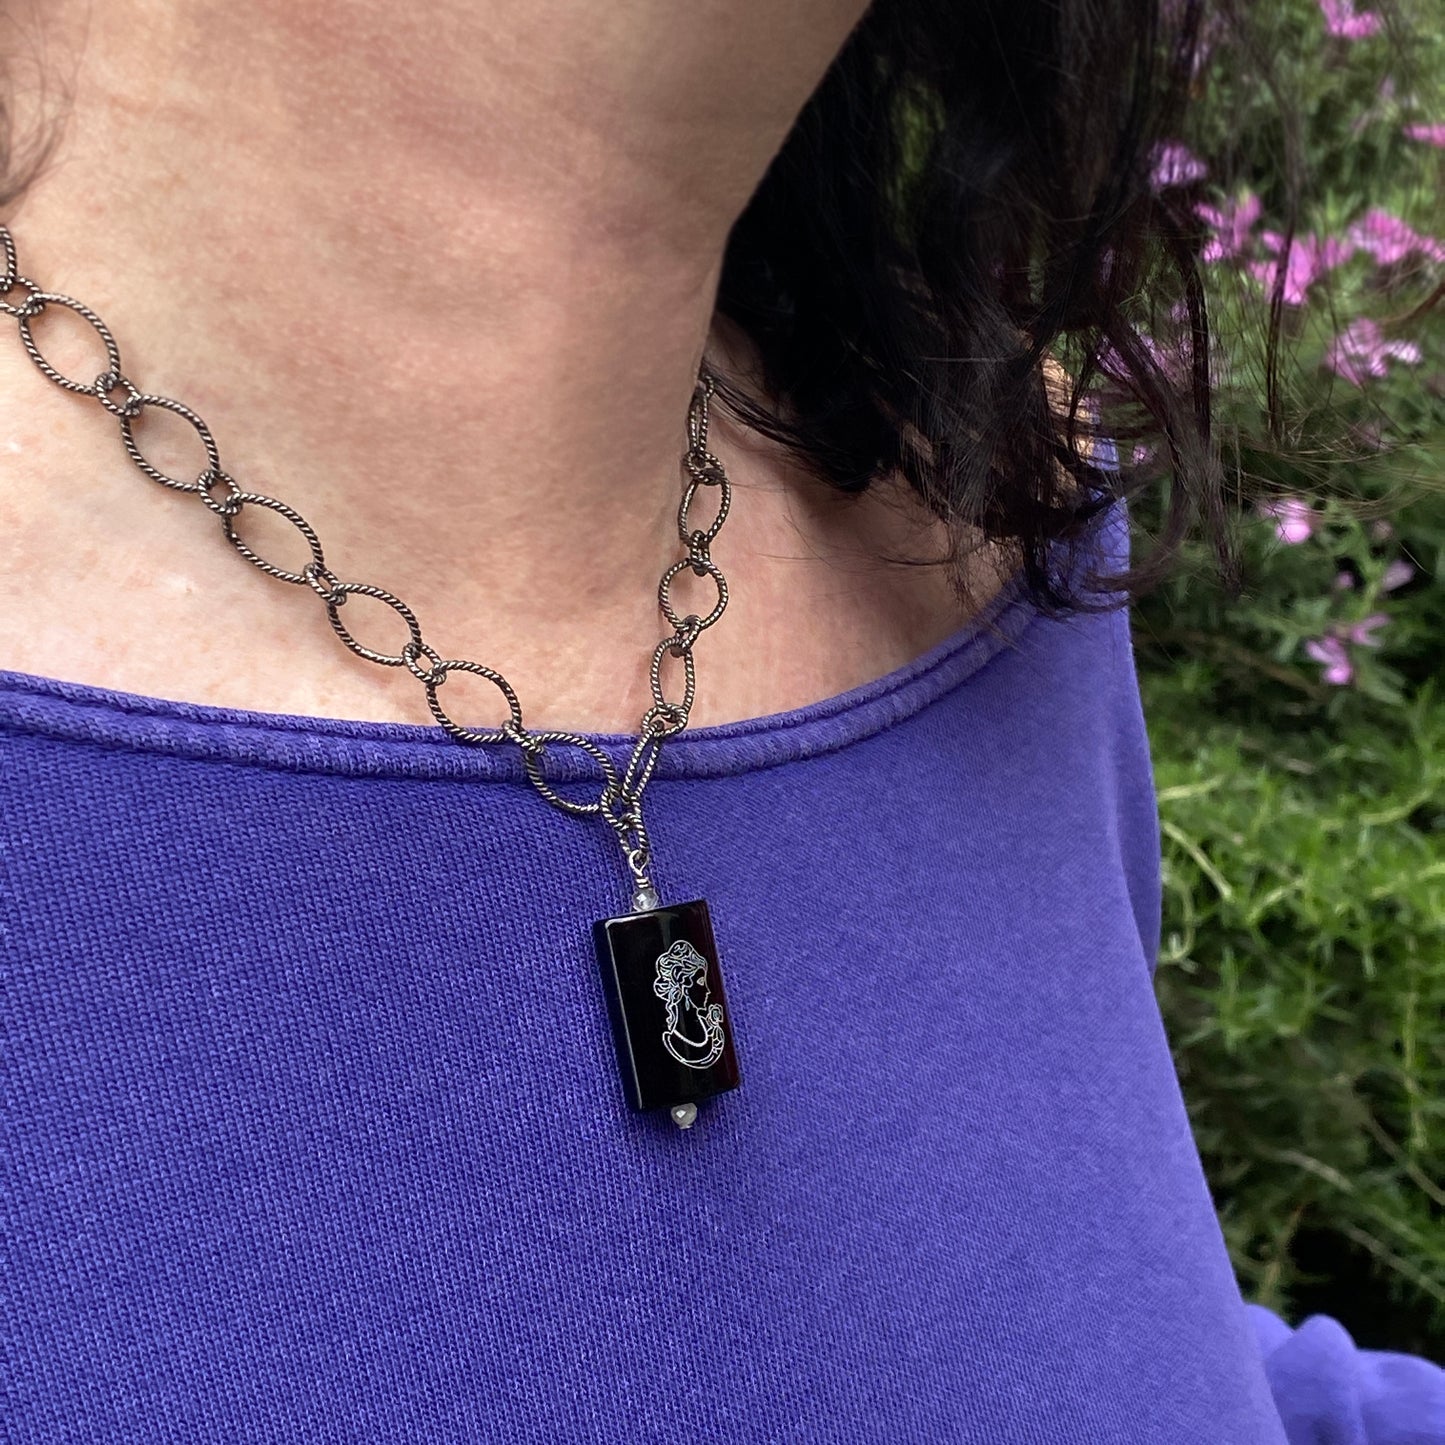 Oxidized Sterling Silver Chain with painted Onyx Cameo with Labradorite Gemstone Pendant necklace